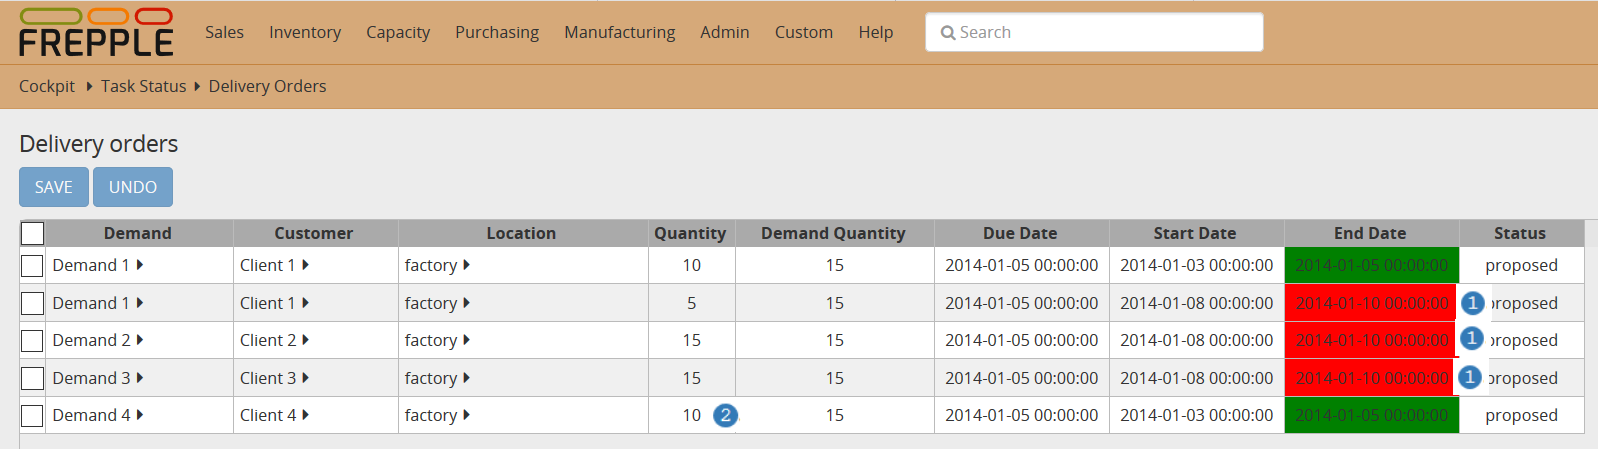 Delivery orders table for demand policies.